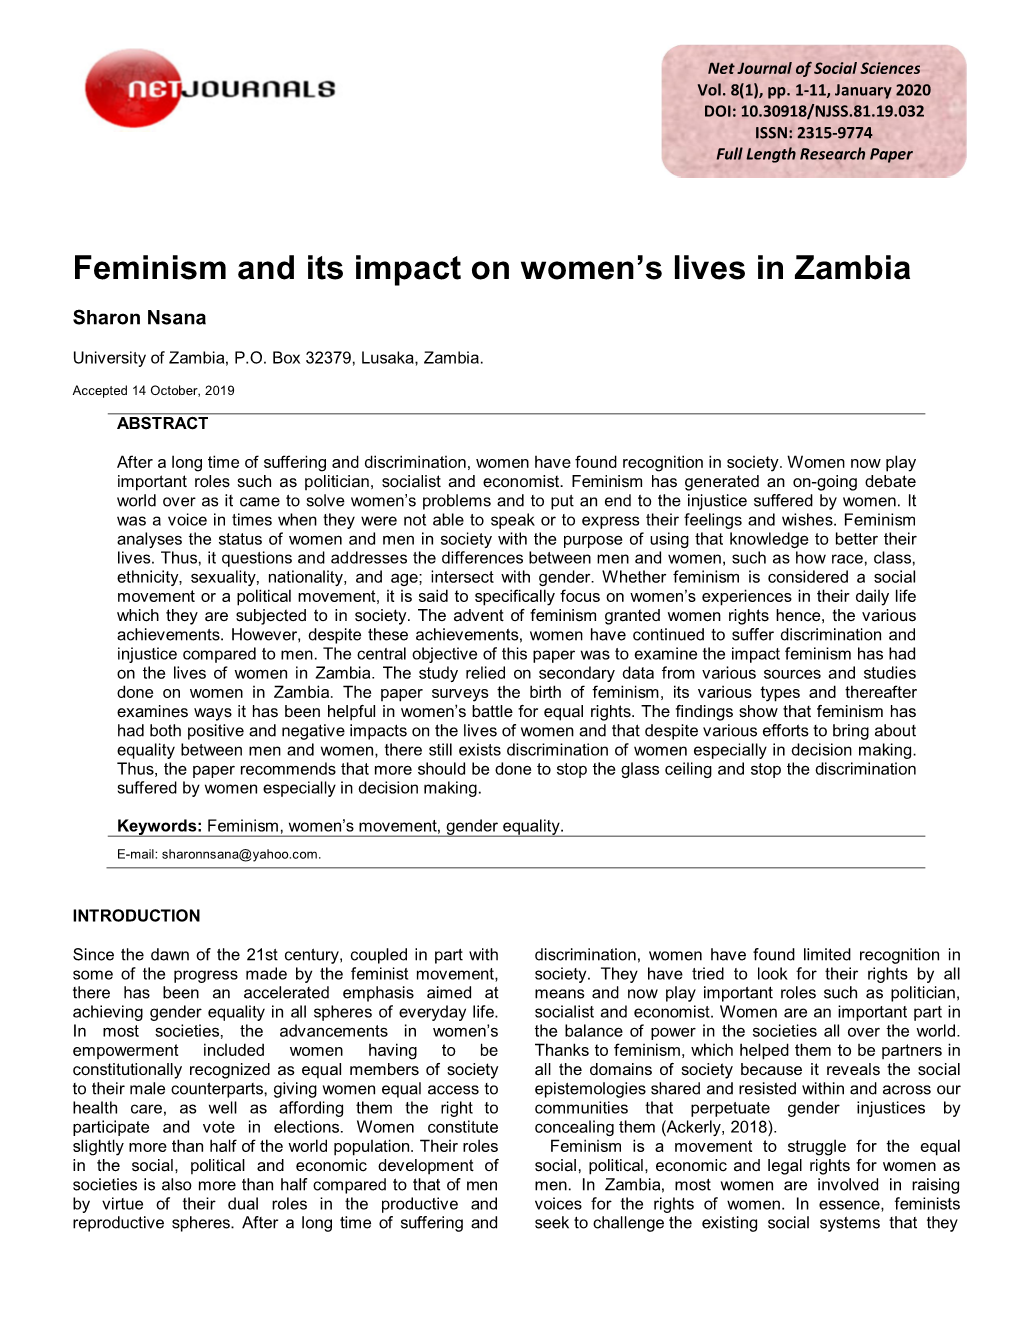 Feminism and Its Impact on Women's Lives in Zambia